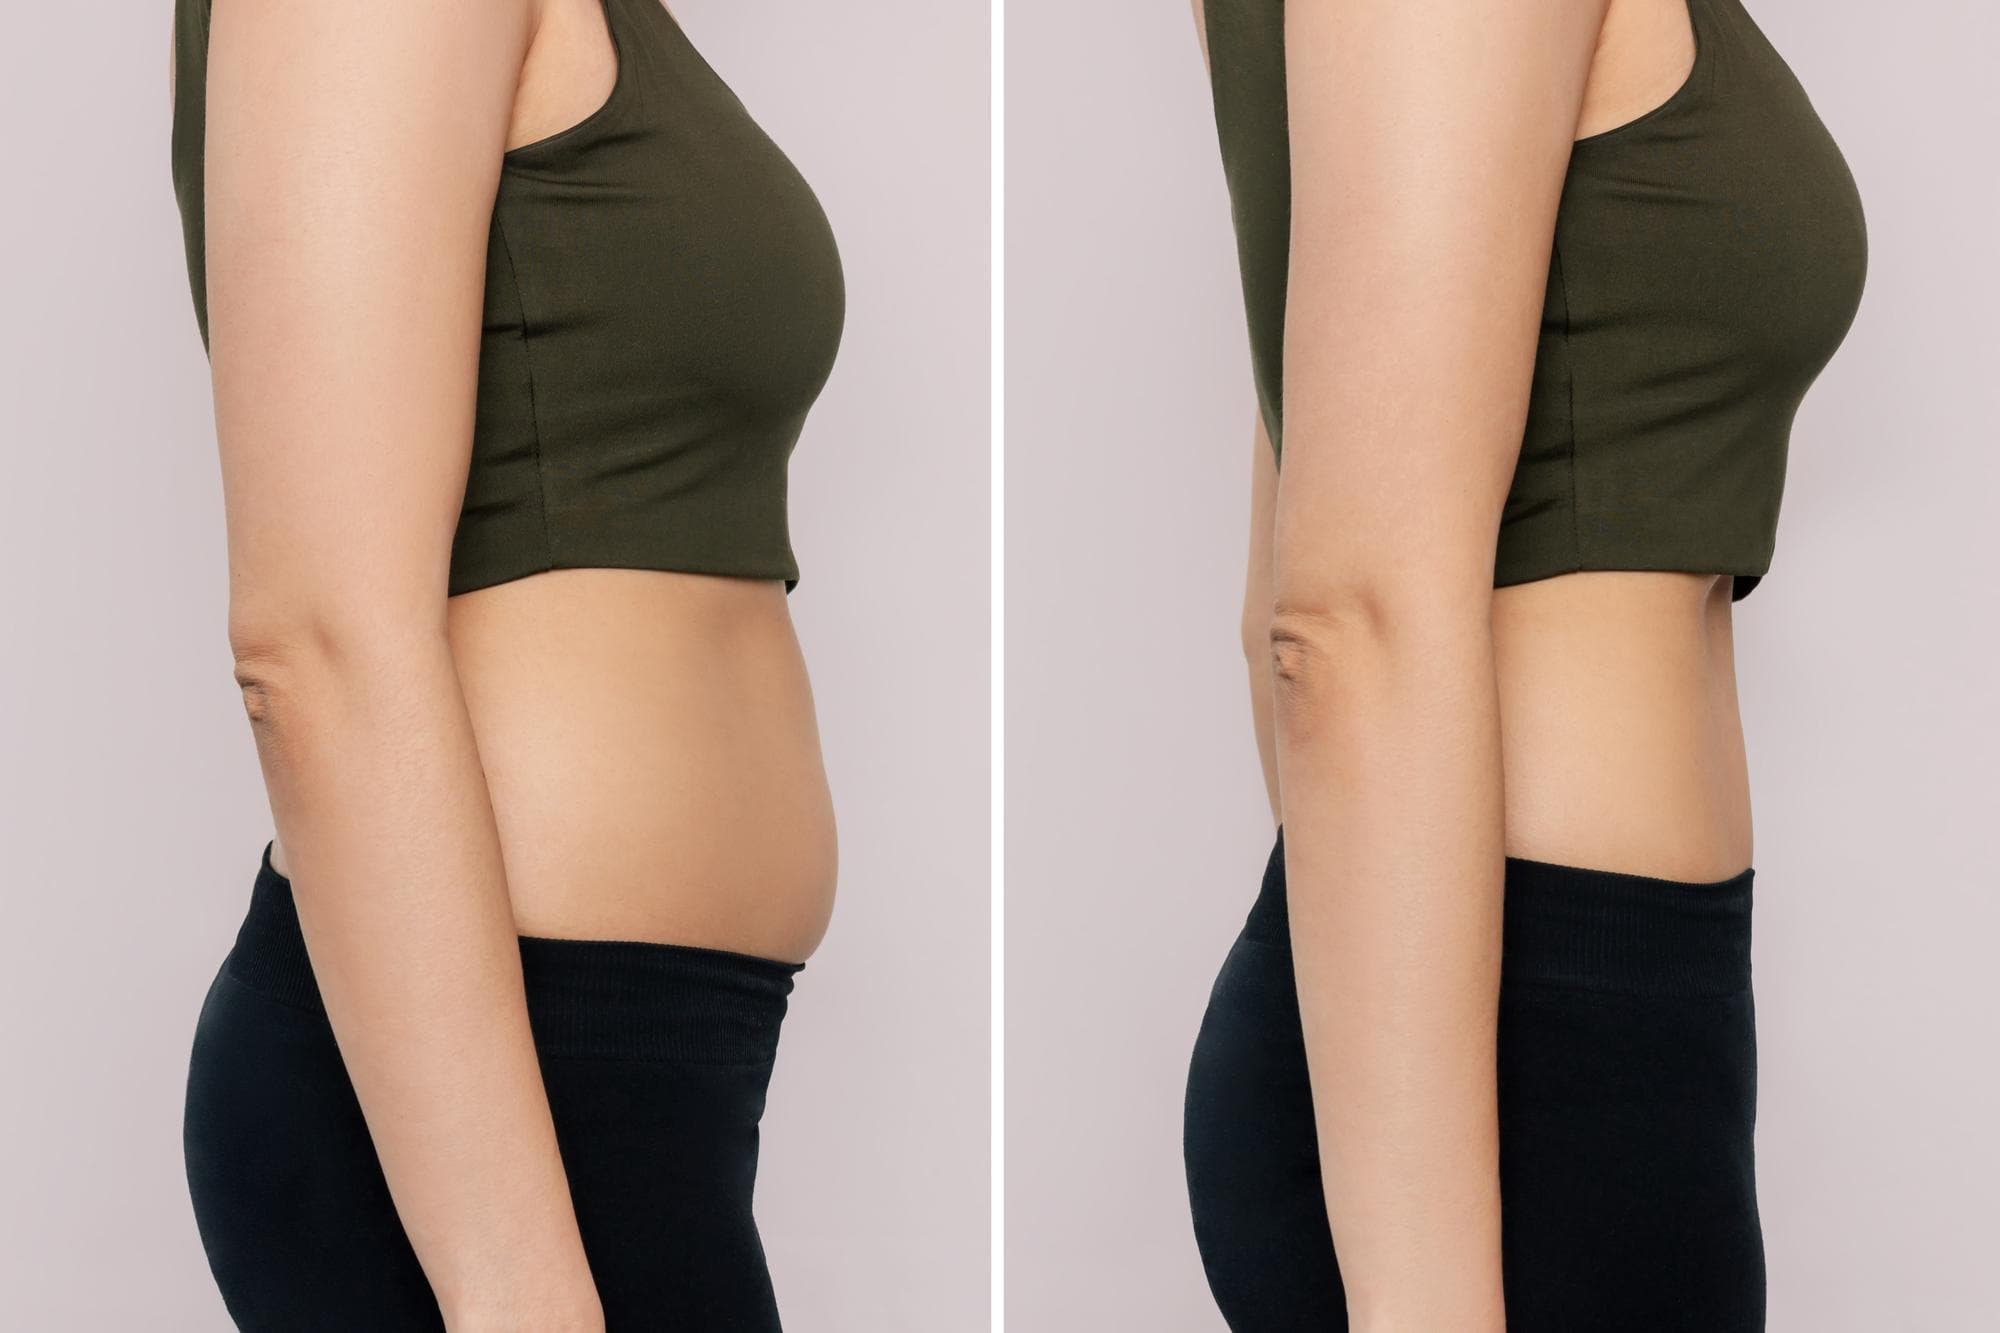 what-to-look-for-when-choosing-a-surgeon-for-liposuction